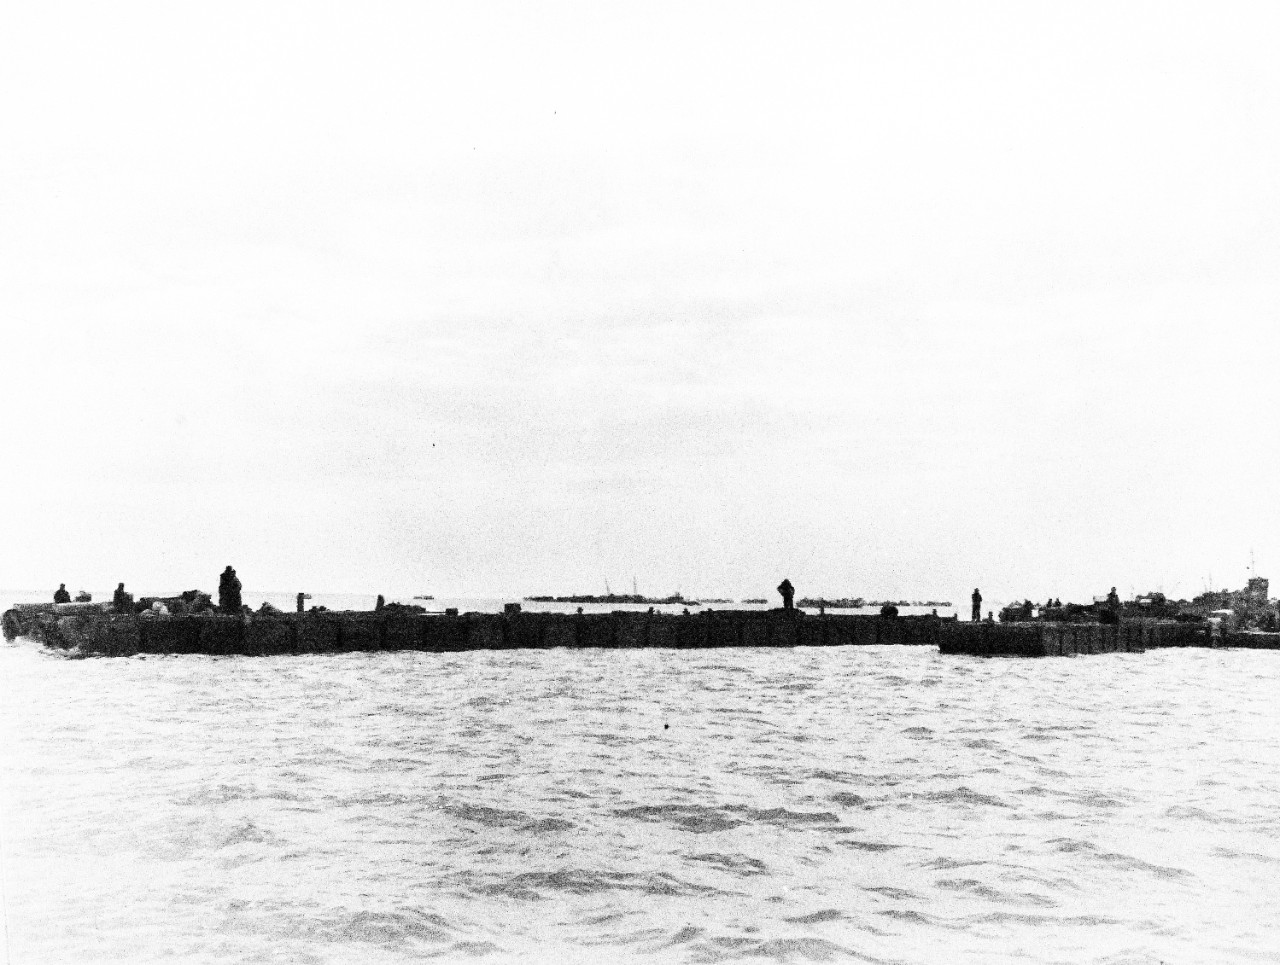 80-G-285178:  Normandy Invasion, Mulberries, June 1944.   Rhino barges carrying equipment to invasion beach of Normandy, France.  In the background is a section of “Gooseberry,” a purposely sunk ships forming part of the “Mulberry,” the man-made harbor.  Photograph released November 7, 1944.  Official U.S. Navy photograph, now in the collections of the National Archives.  (2016/03/15).